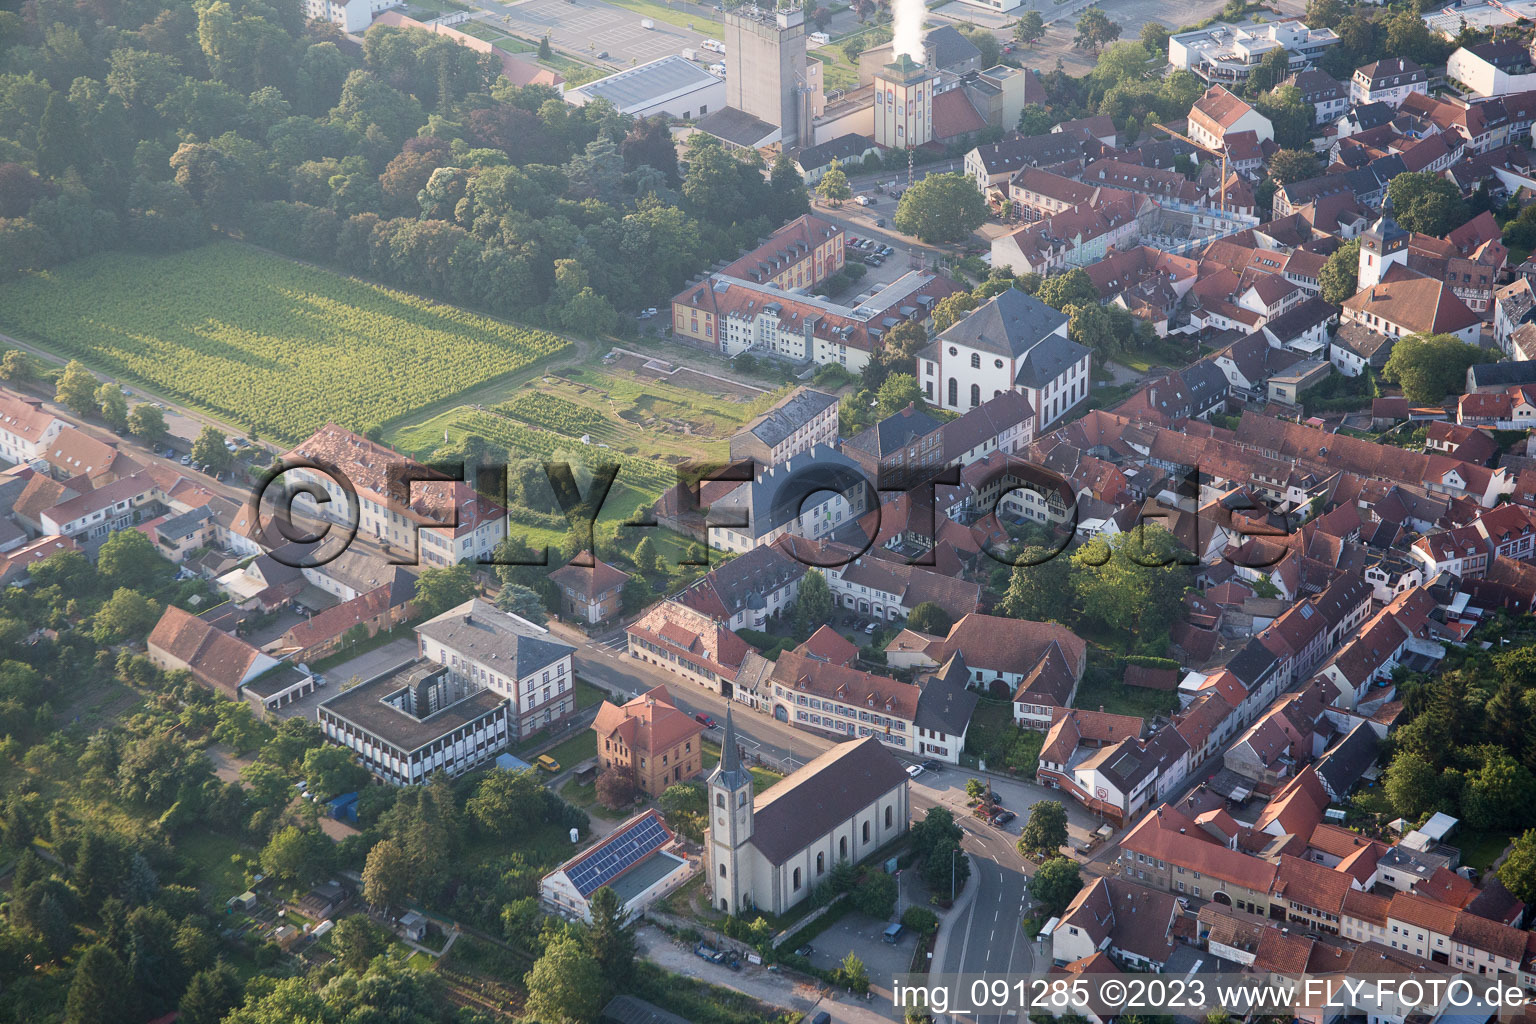 Aerial view of Church building in Hl. Anna Old Town- center of downtown in Kirchheimbolanden in the state Rhineland-Palatinate, Germany